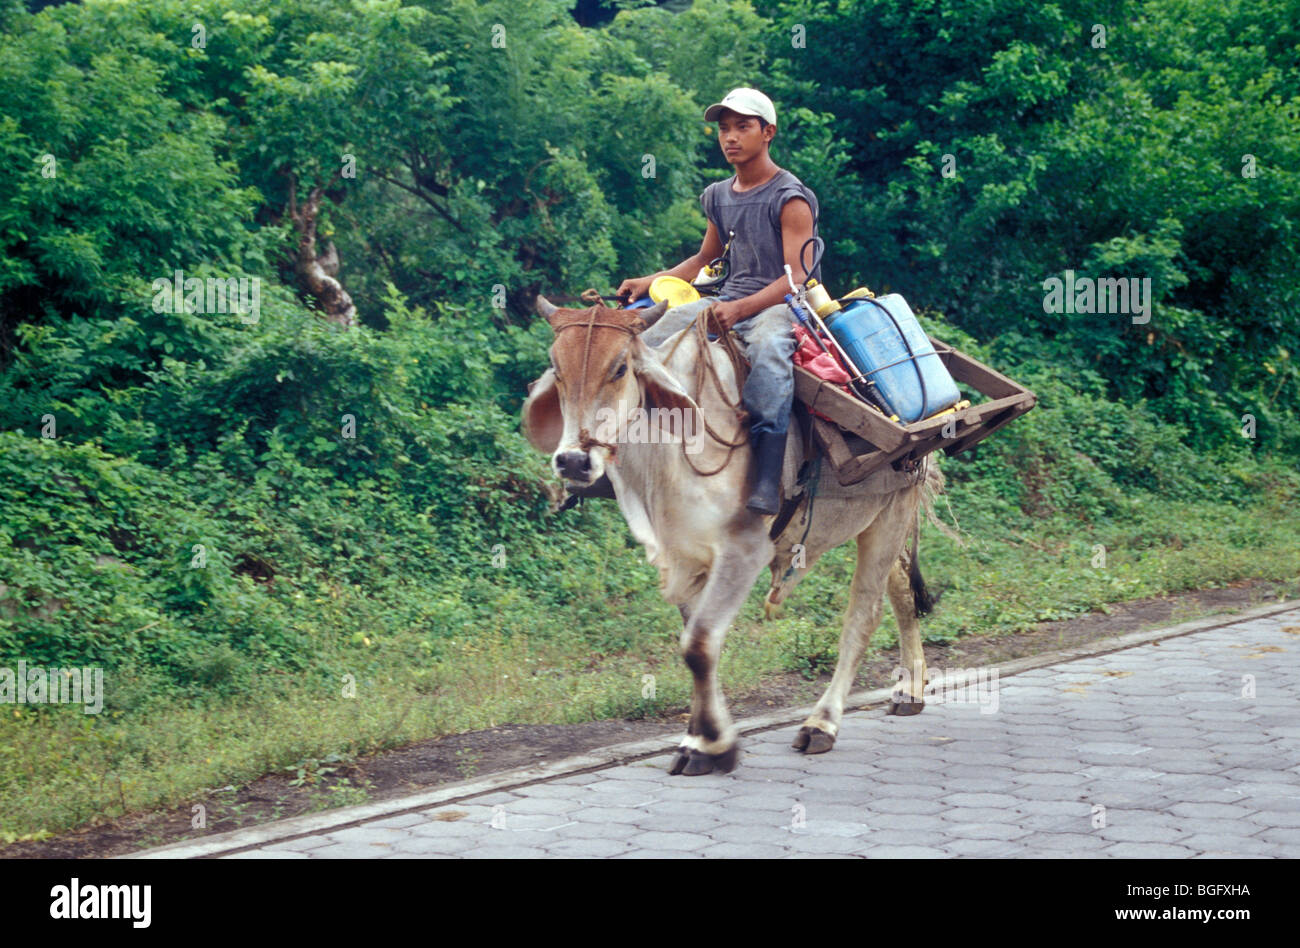 agricultural-worker-riding-a-domesticate